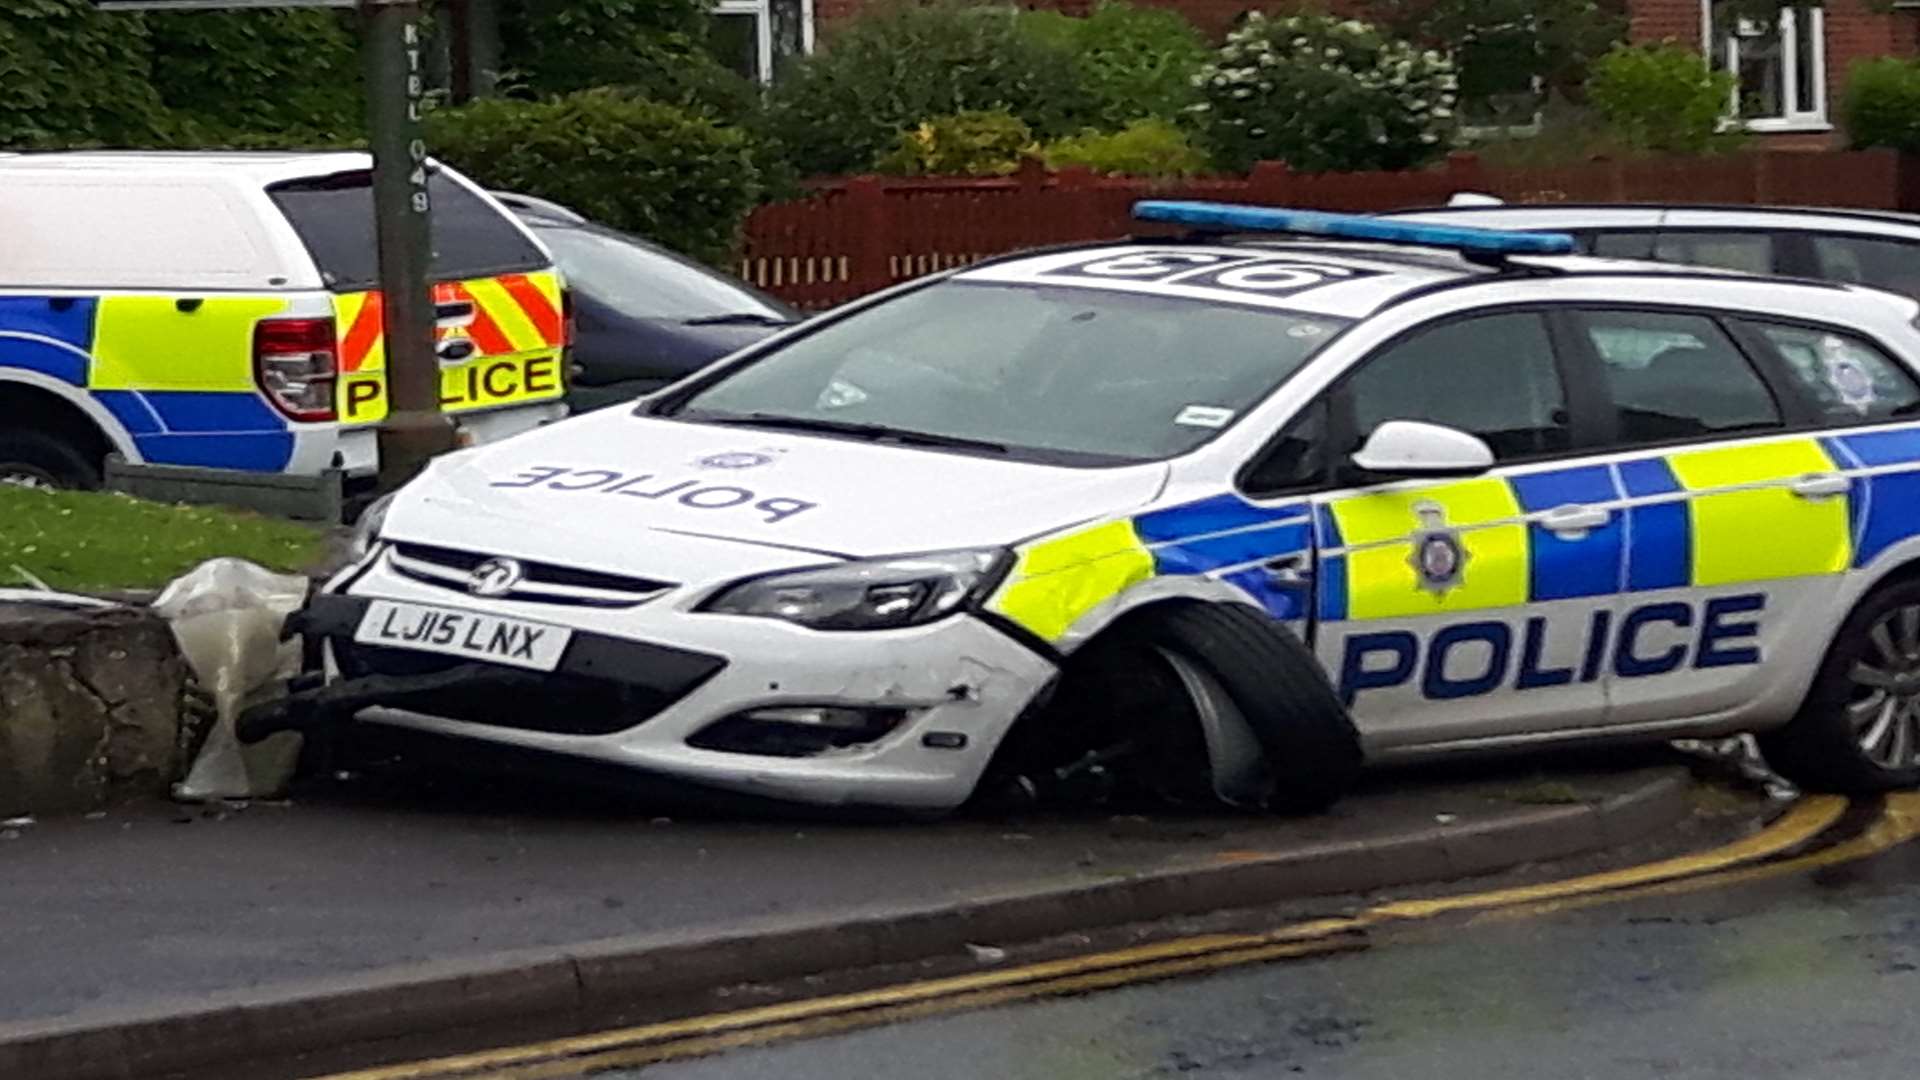 A BTP car collided with a Ford Focus